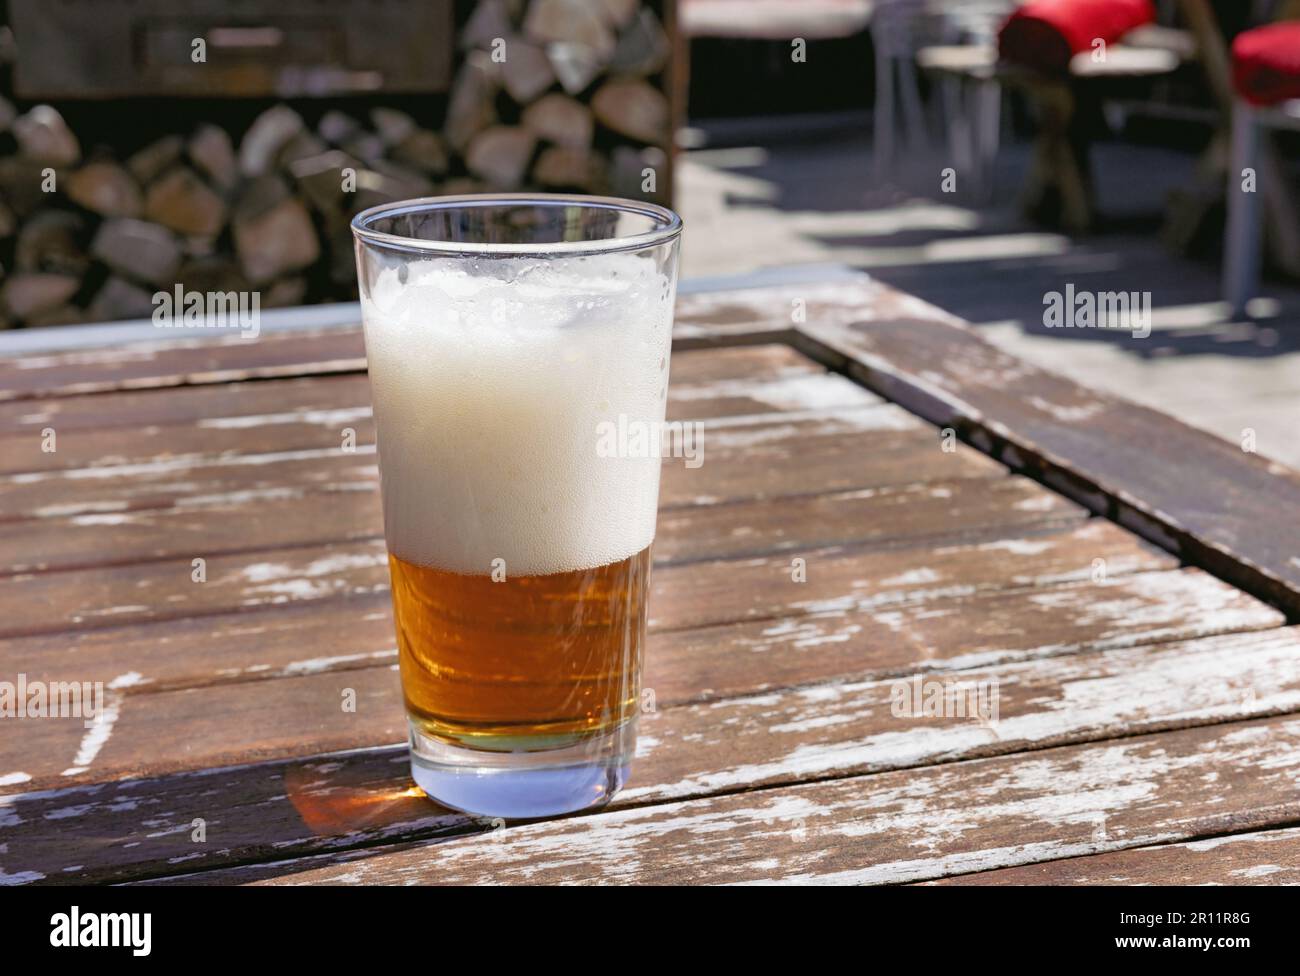 glass of beer on the table close-up Stock Photo